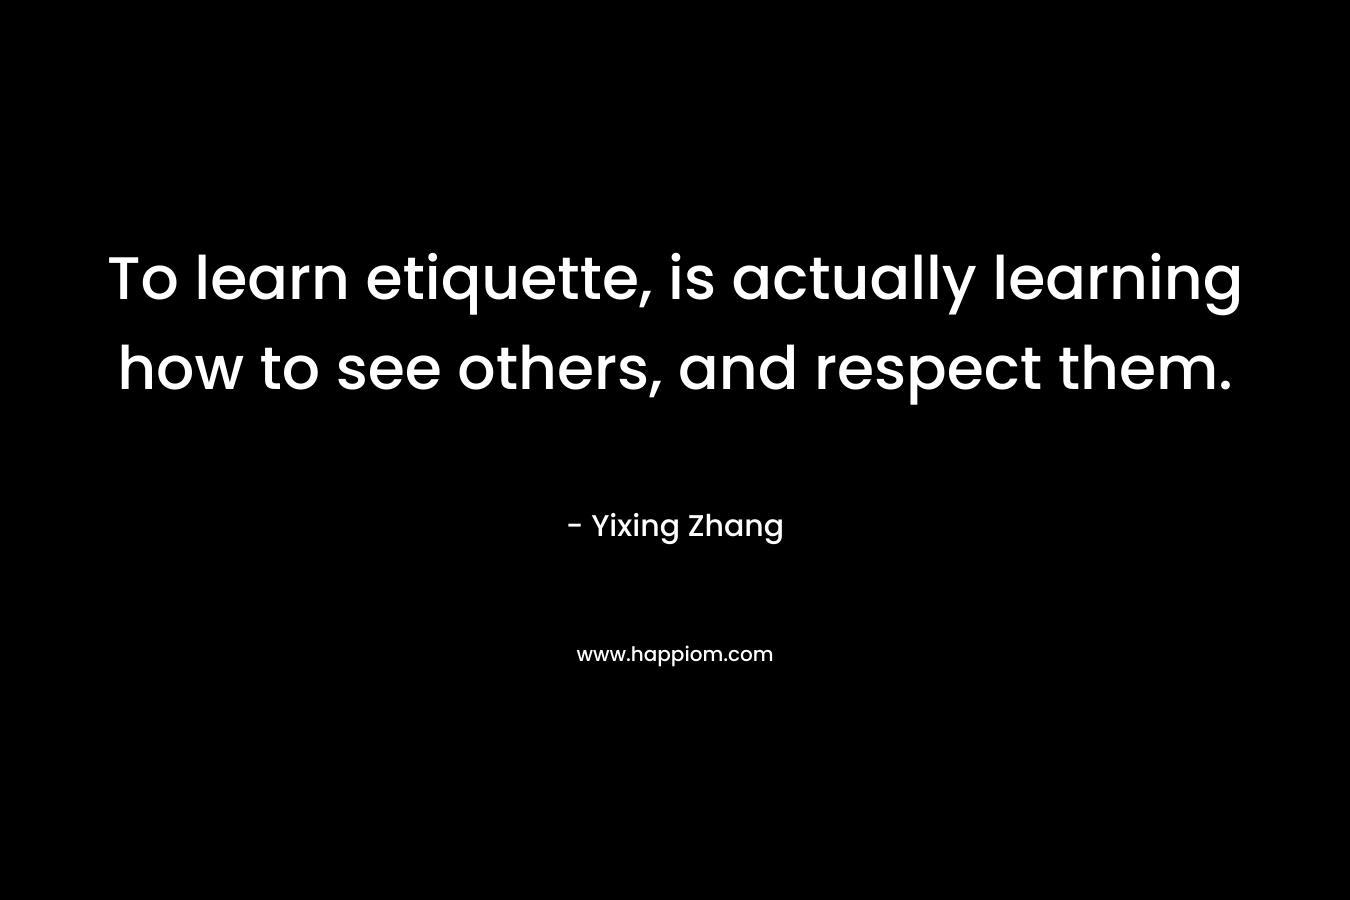 To learn etiquette, is actually learning how to see others, and respect them.